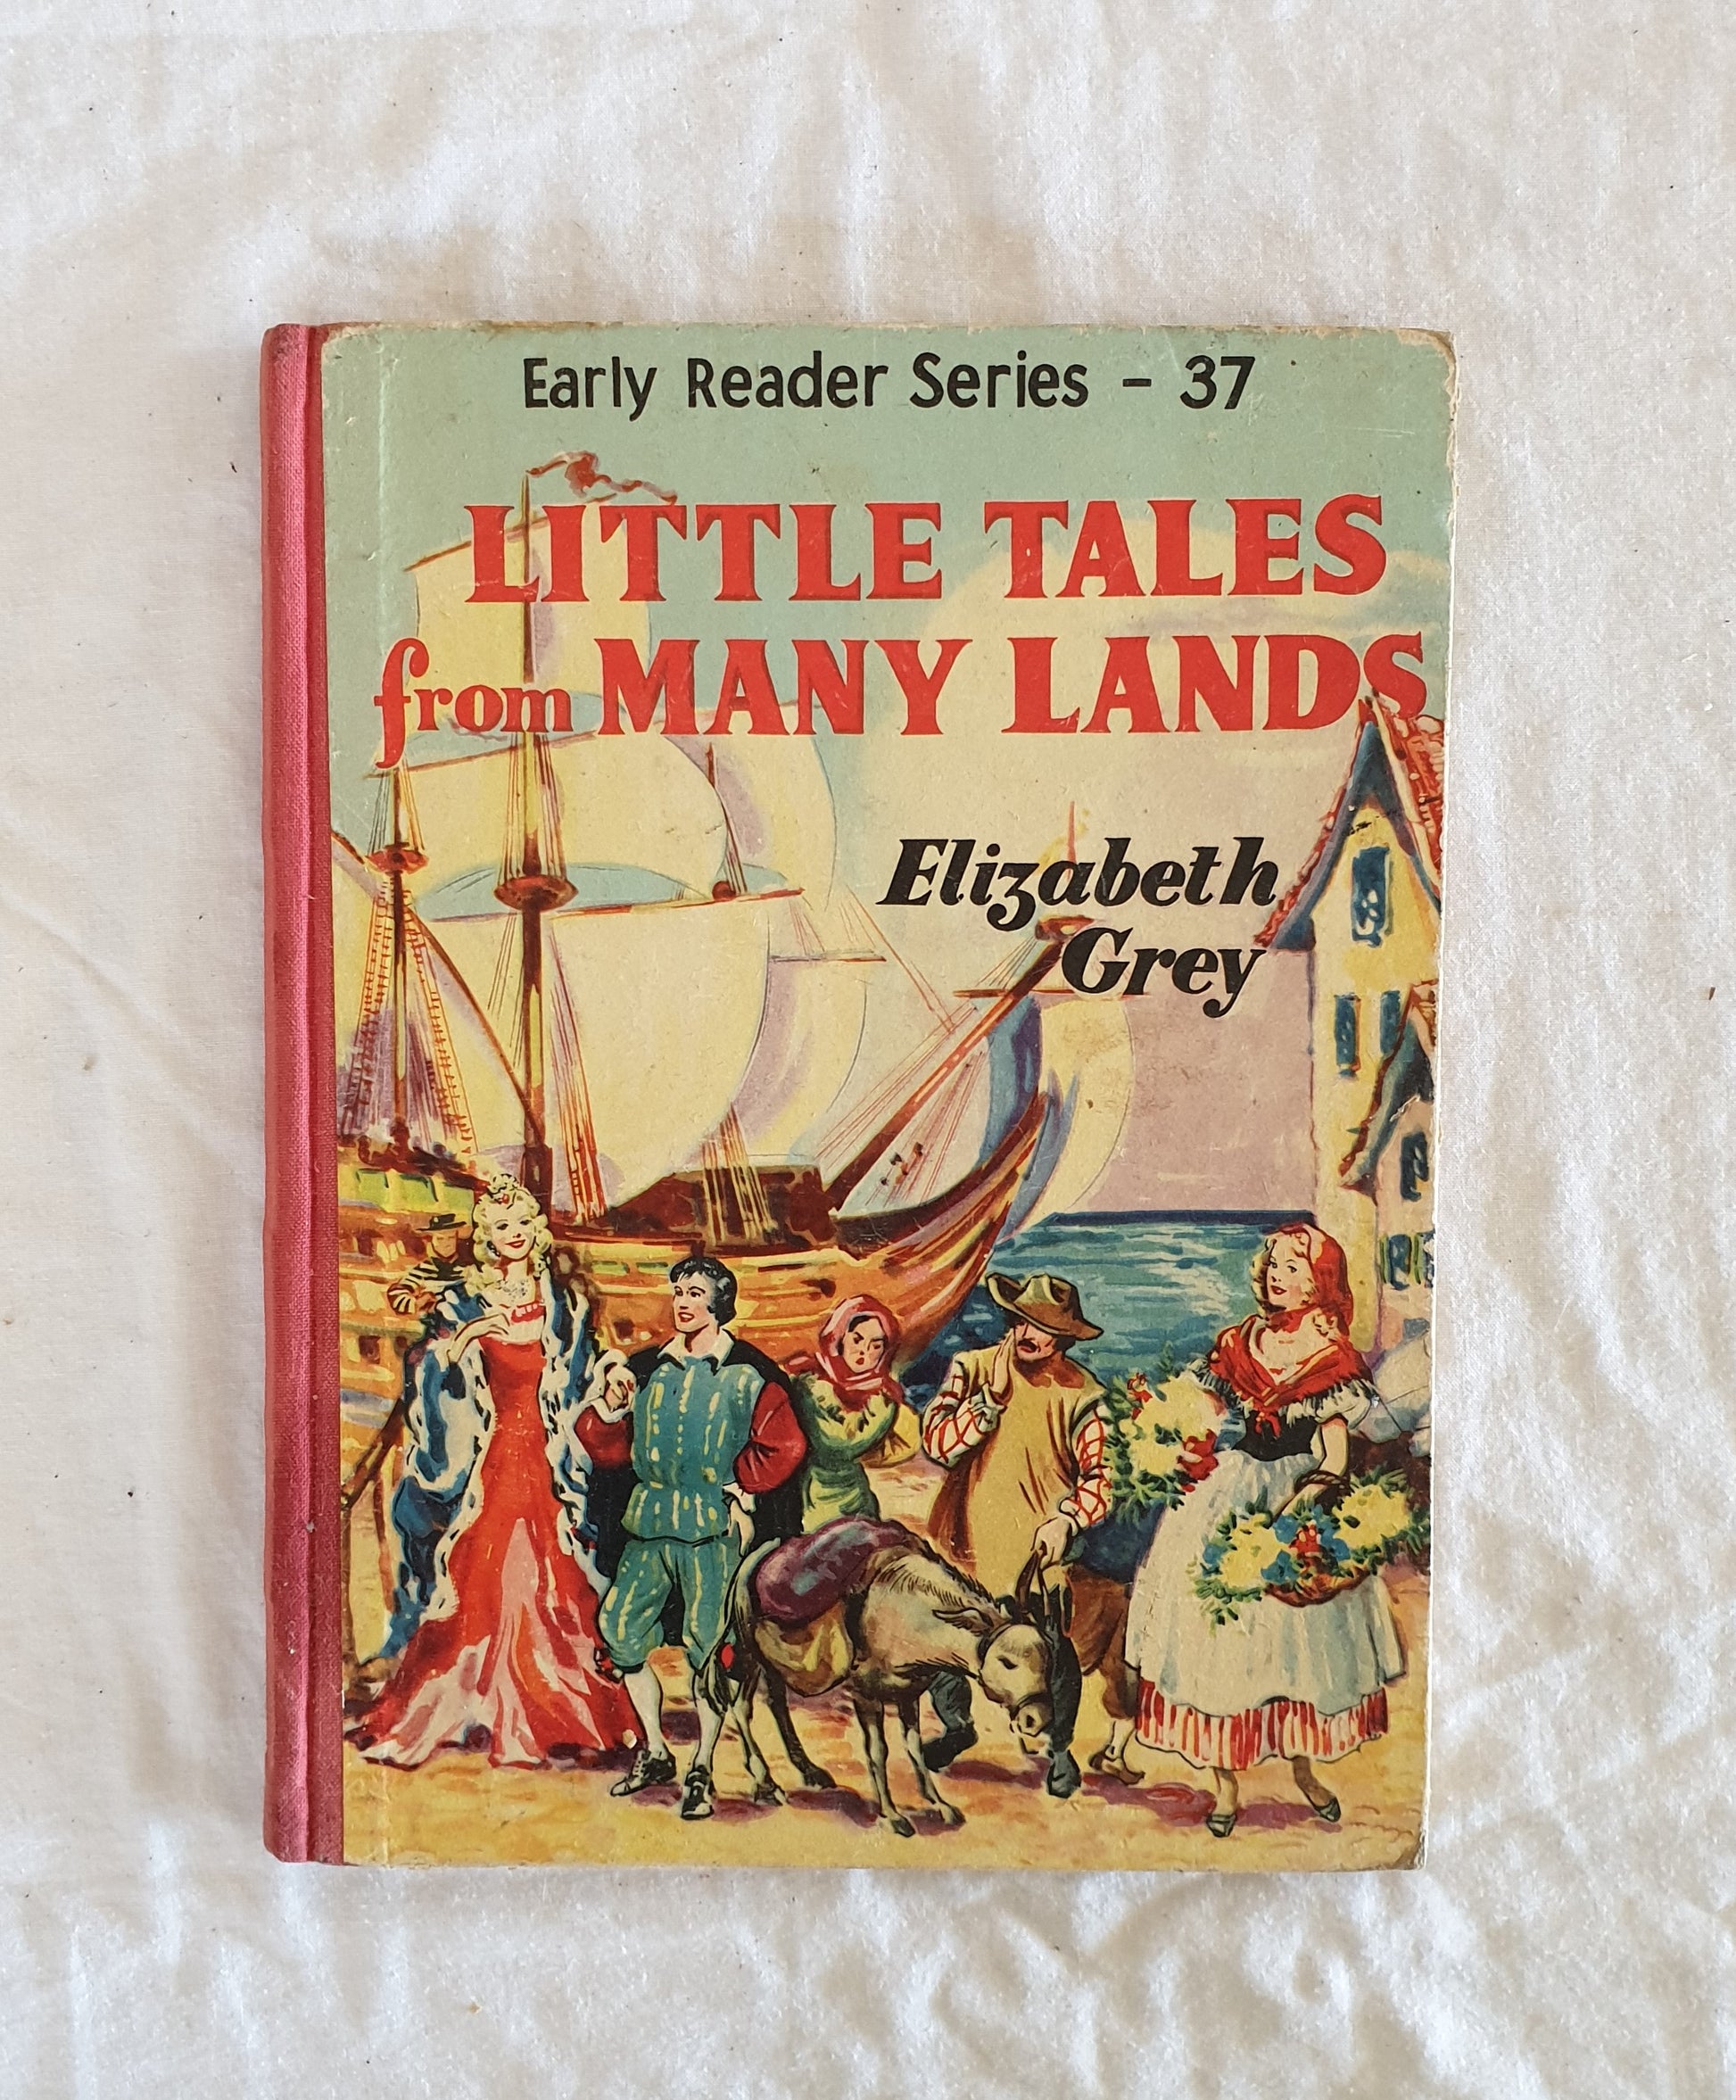 Little Tales from Many Lands  Early Reader Series No. 37  by Elizabeth Grey